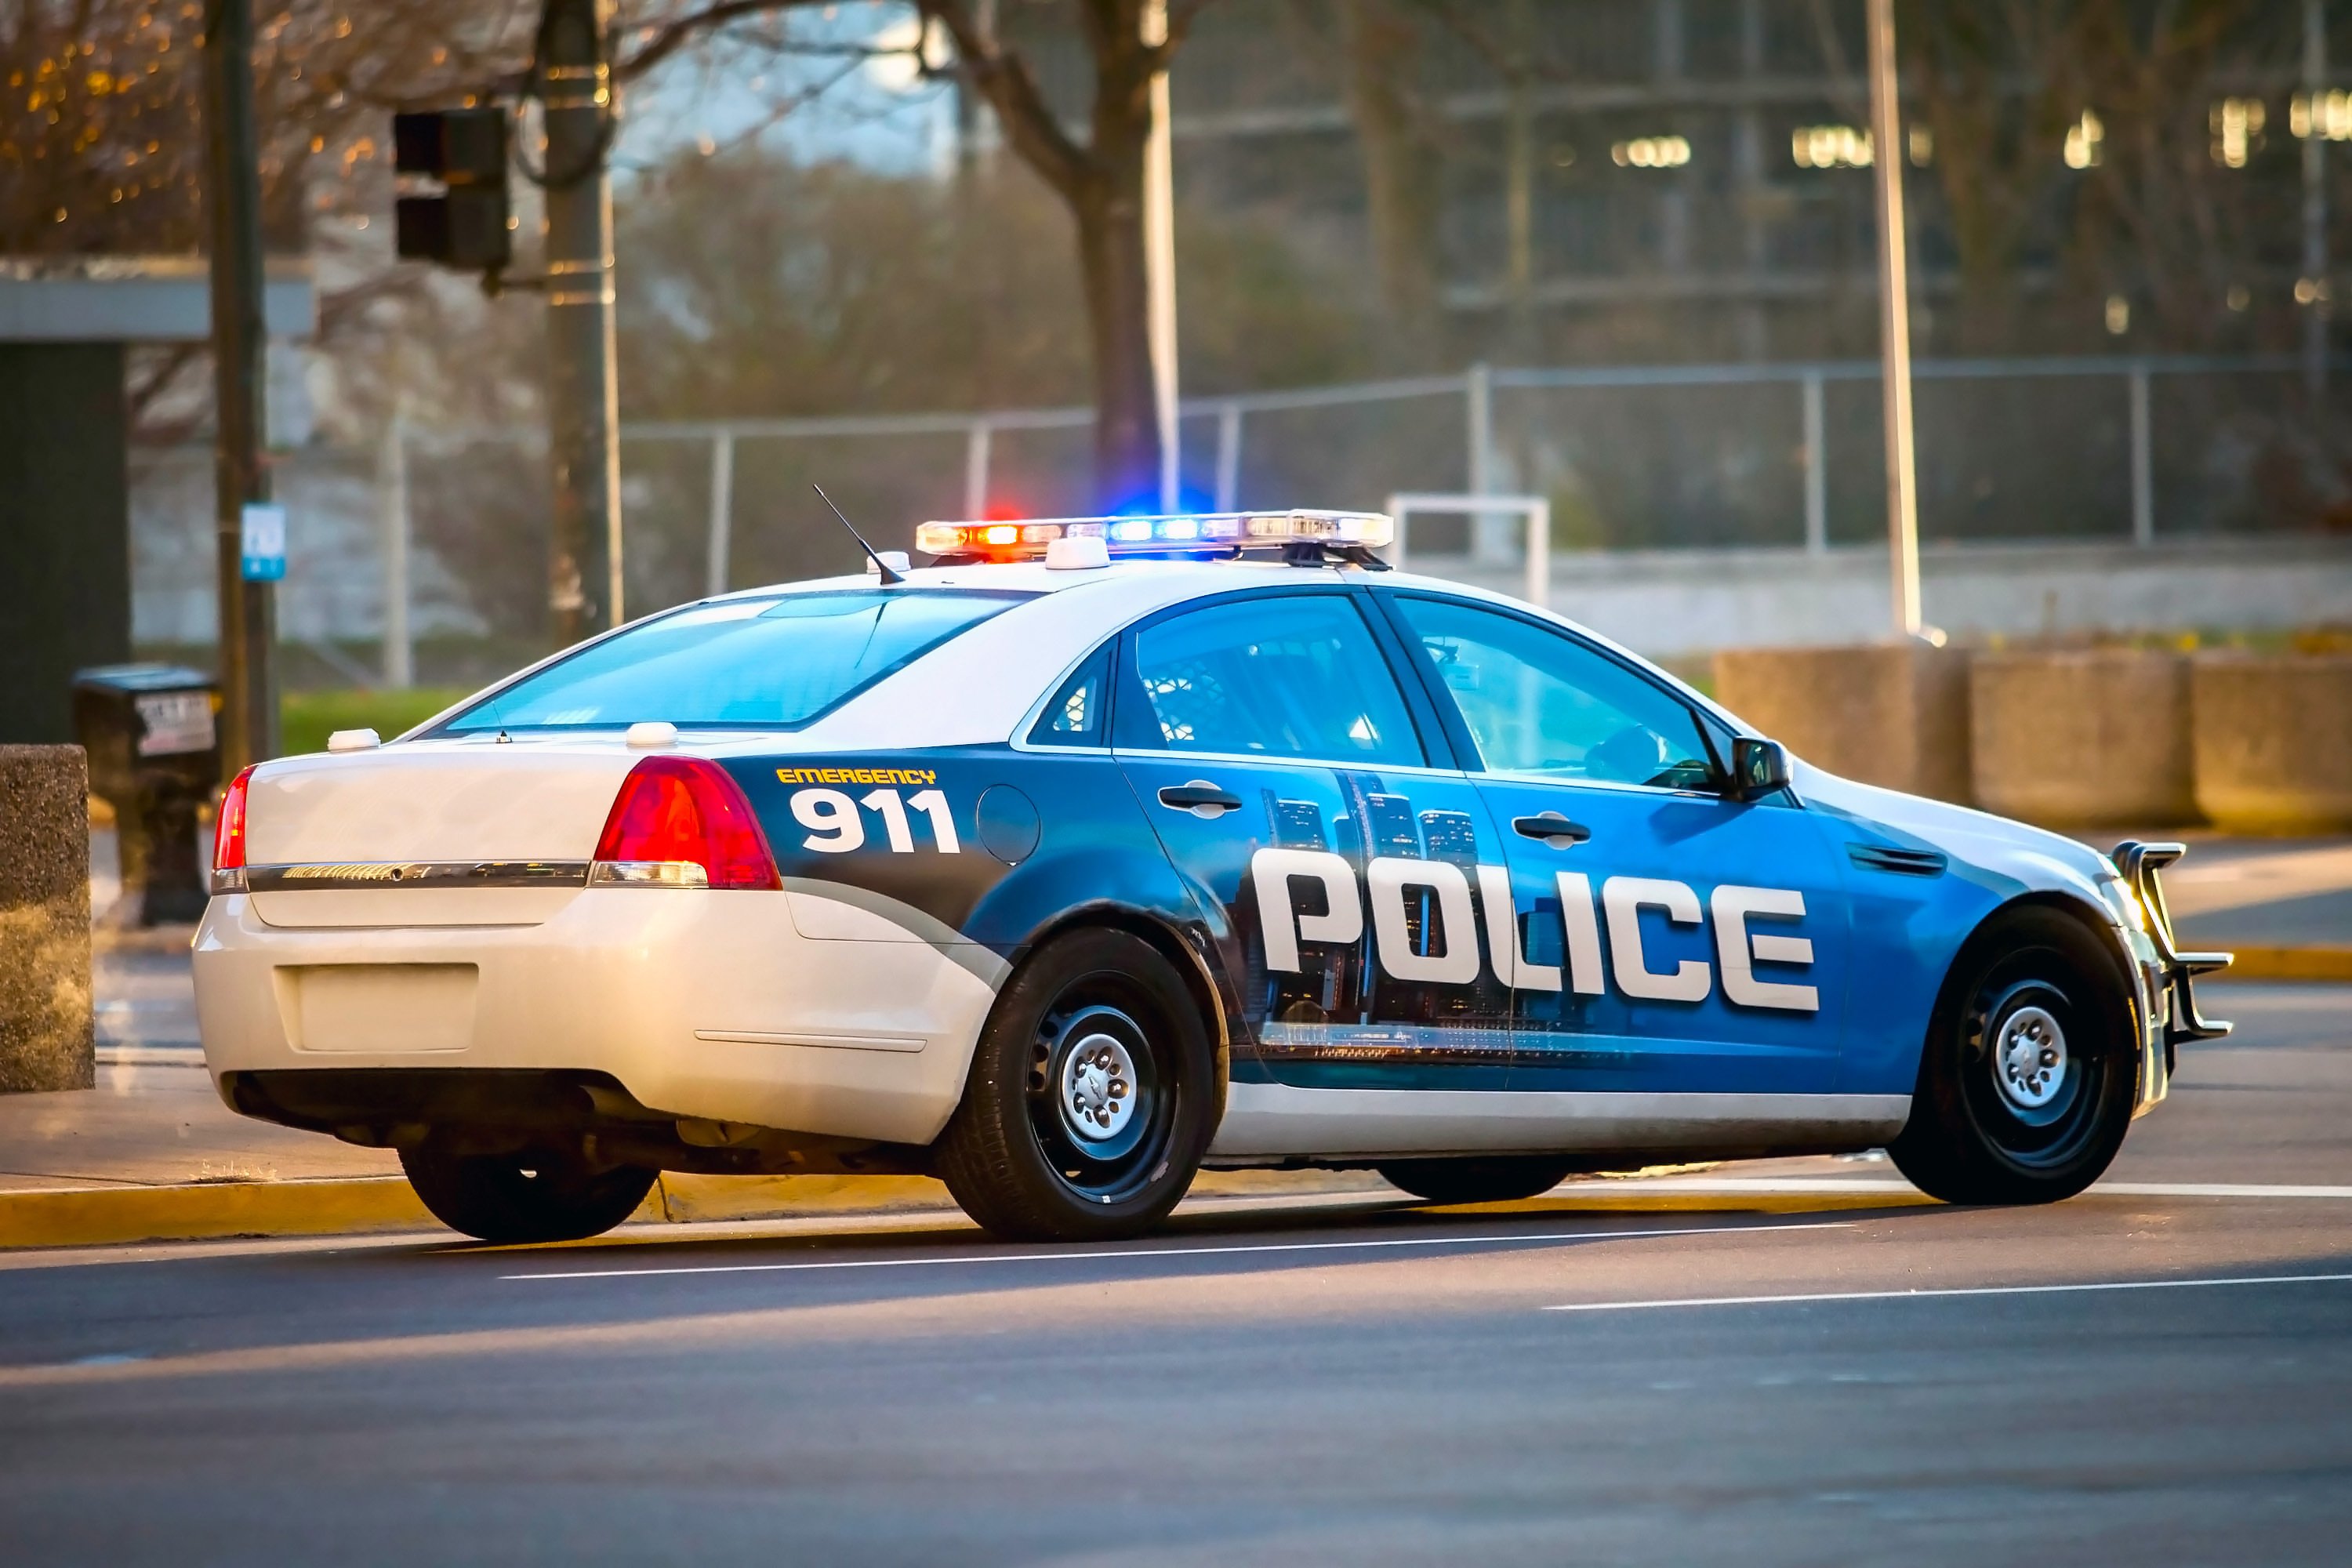 Police car driving down a road | Photo: Shutterstock